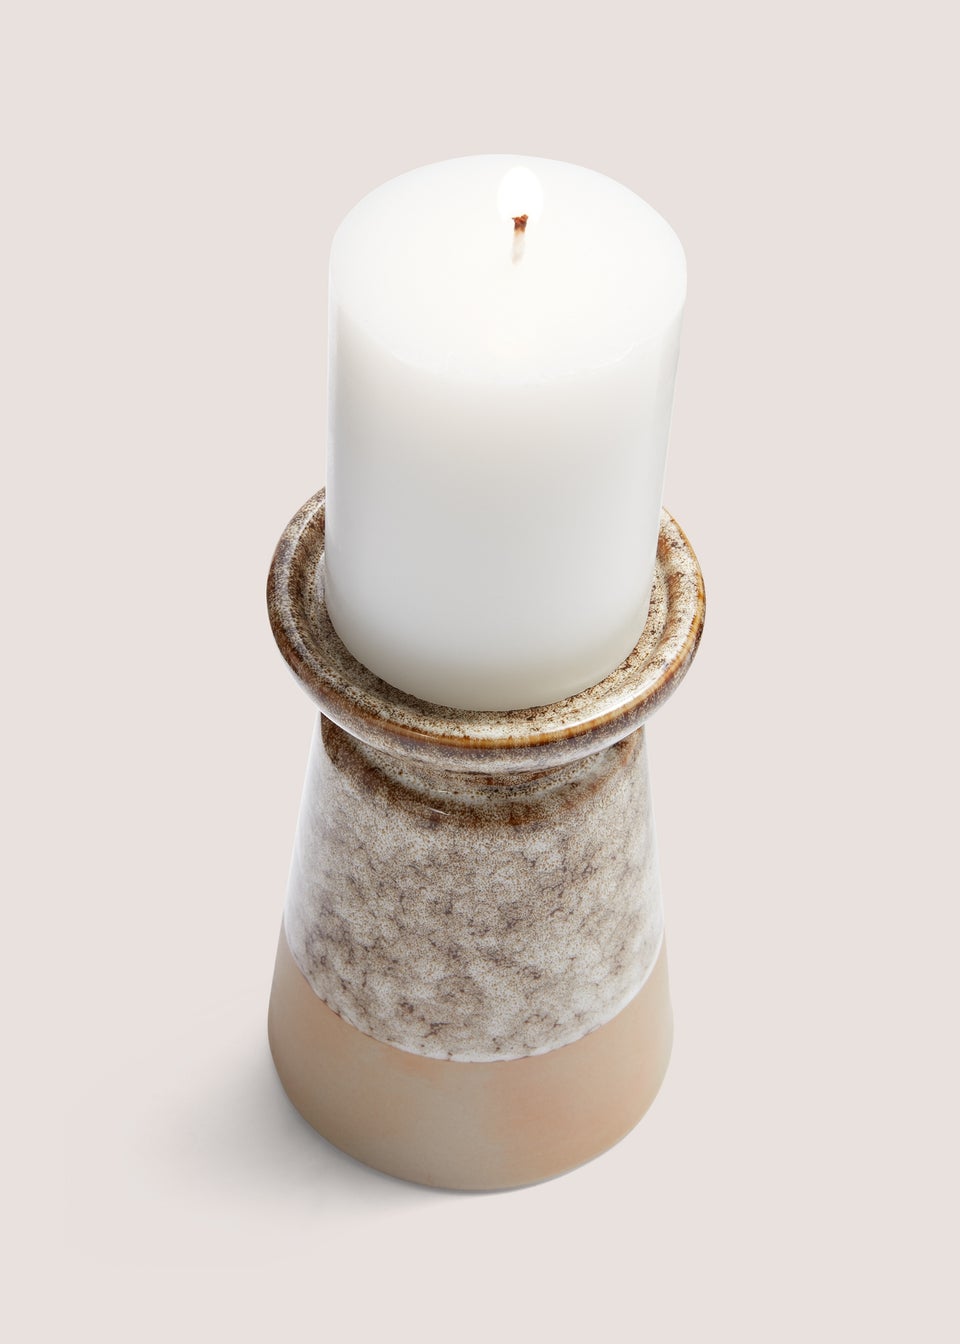 Gold Speckled Candle Holder (16cm x 10cm x 10cm)